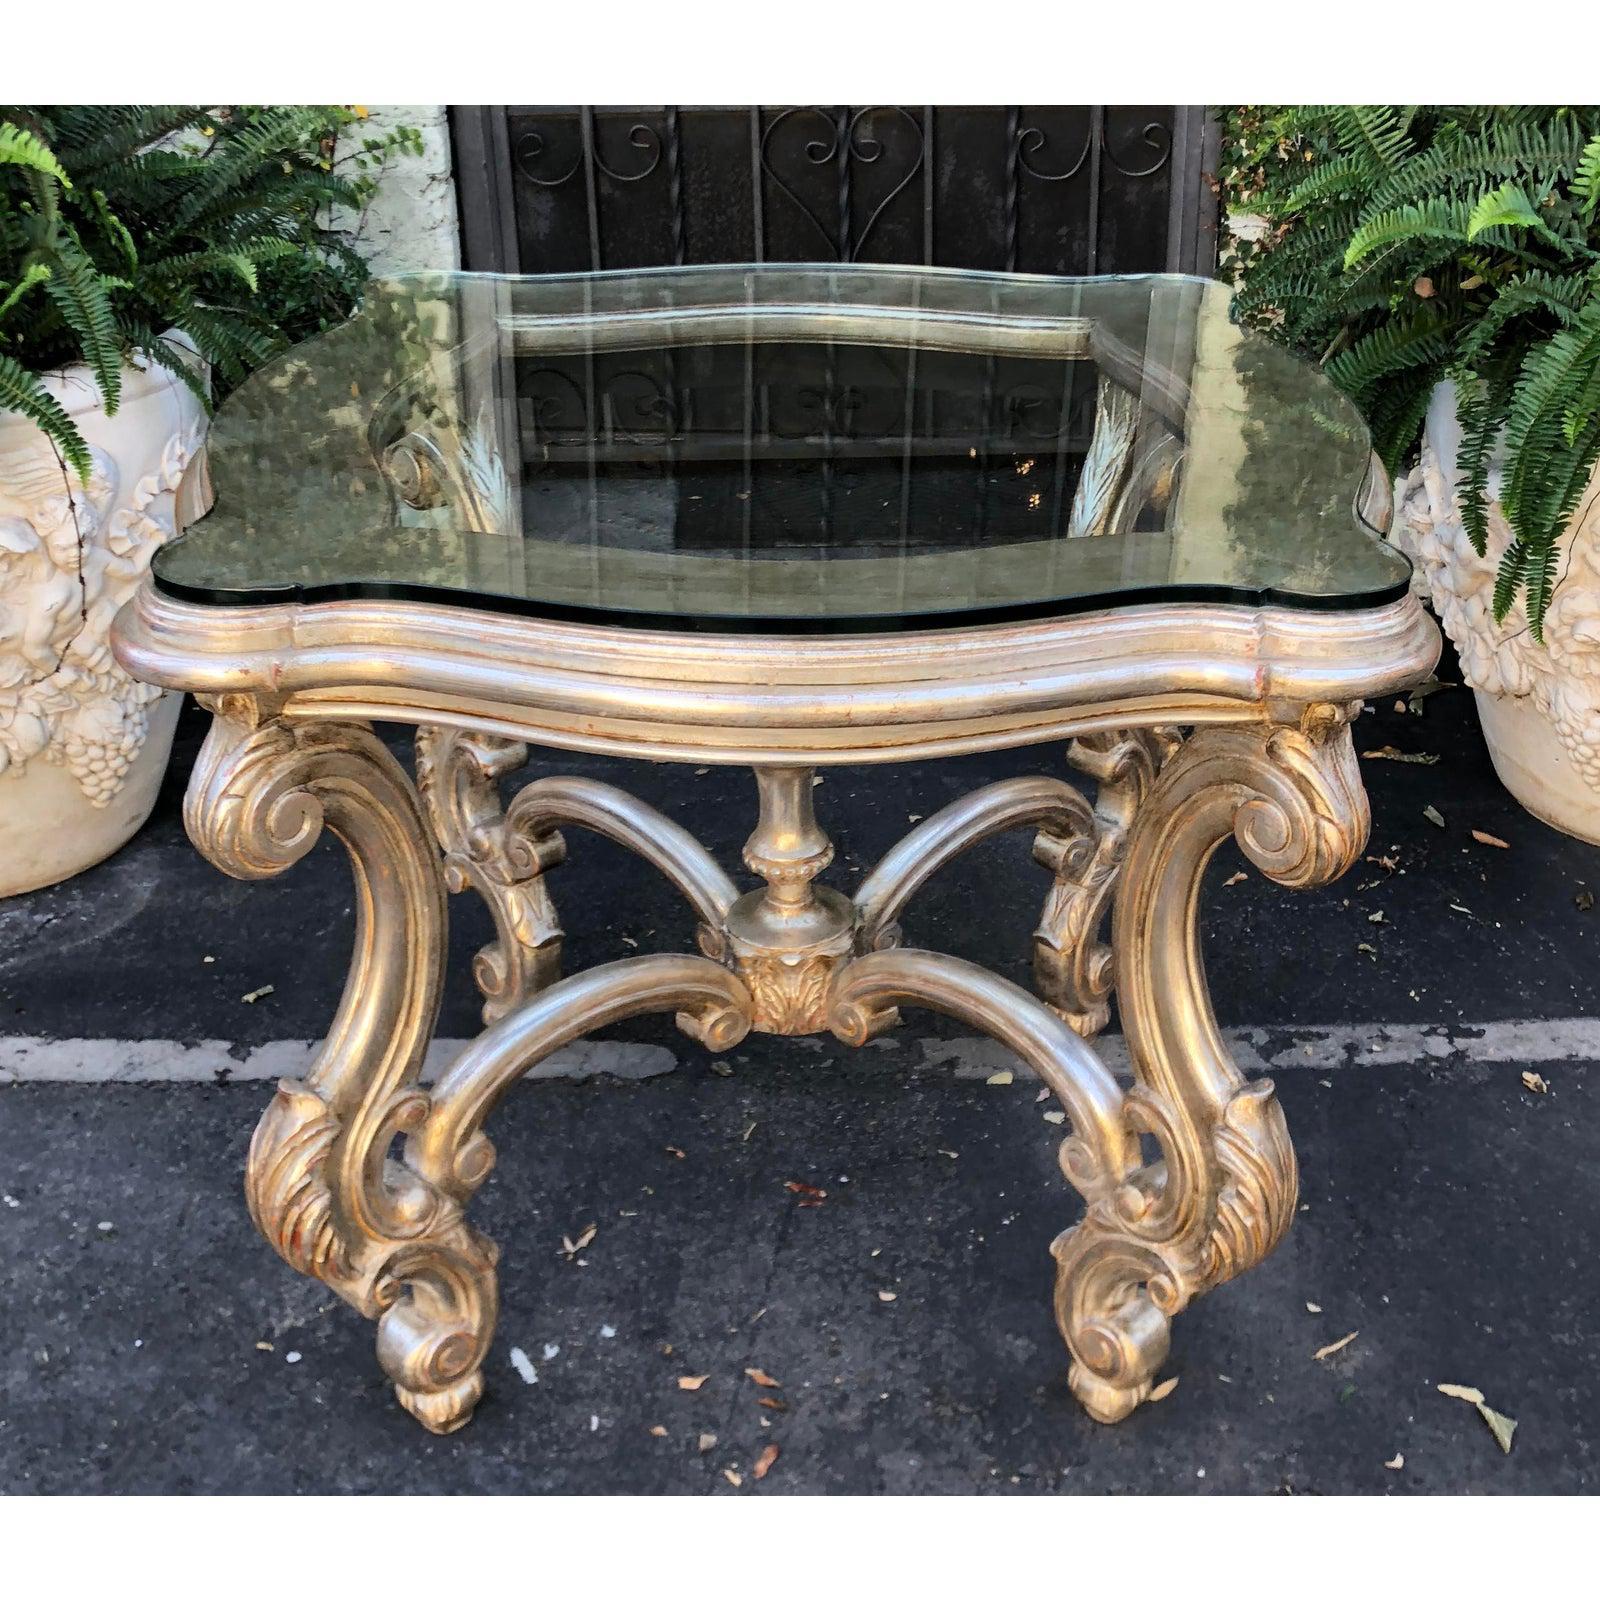 Spanish Antique Venetian Style Silver Giltwood Designer Center or Side Table For Sale